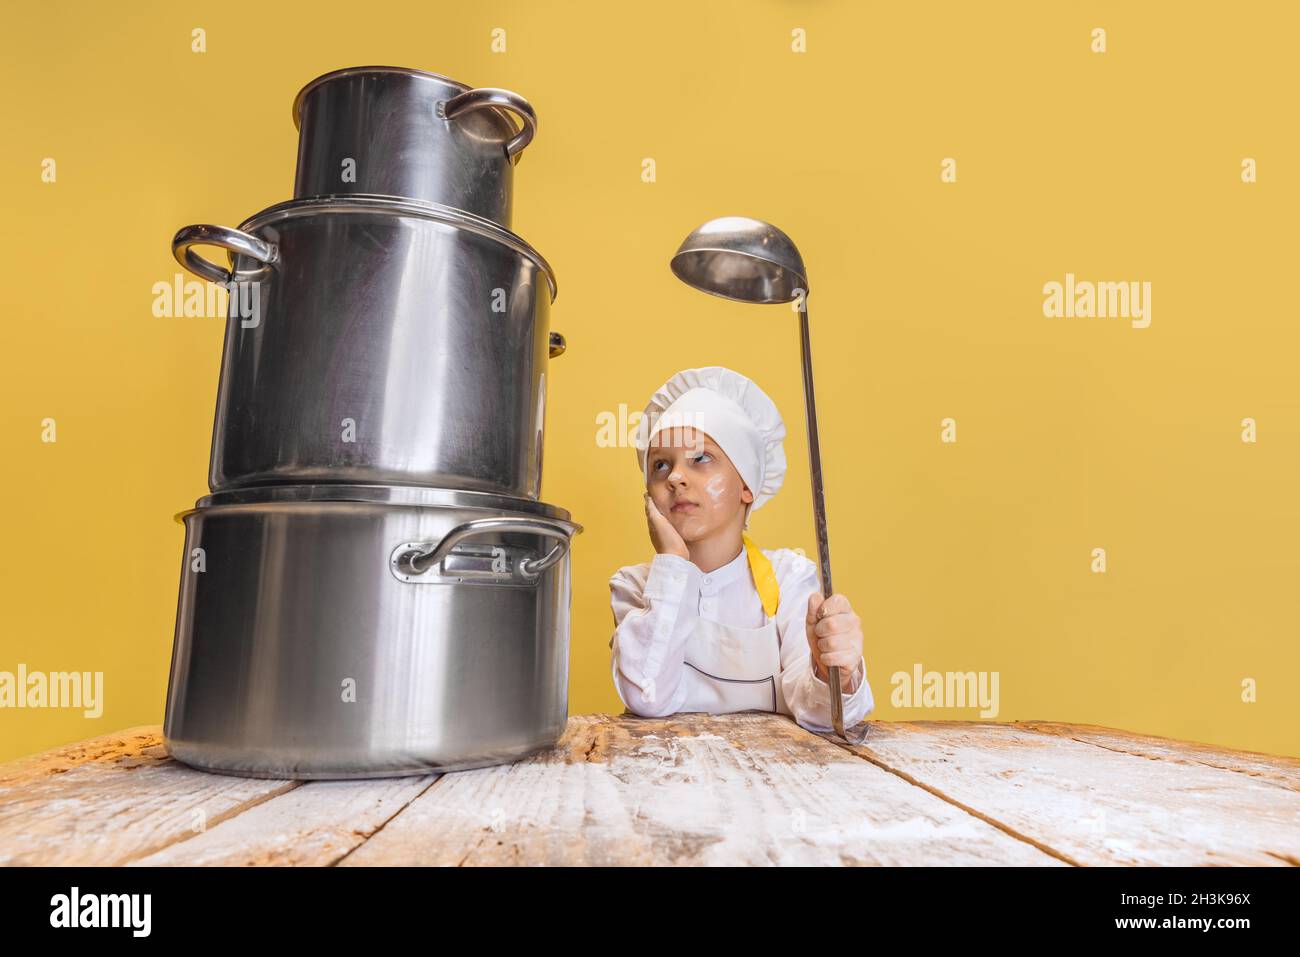 https://c8.alamy.com/comp/2H3K96X/close-up-cute-little-boy-in-white-cook-uniform-and-huge-chefs-hat-at-kids-kitchen-with-big-pans-isolated-on-yellow-studio-background-2H3K96X.jpg